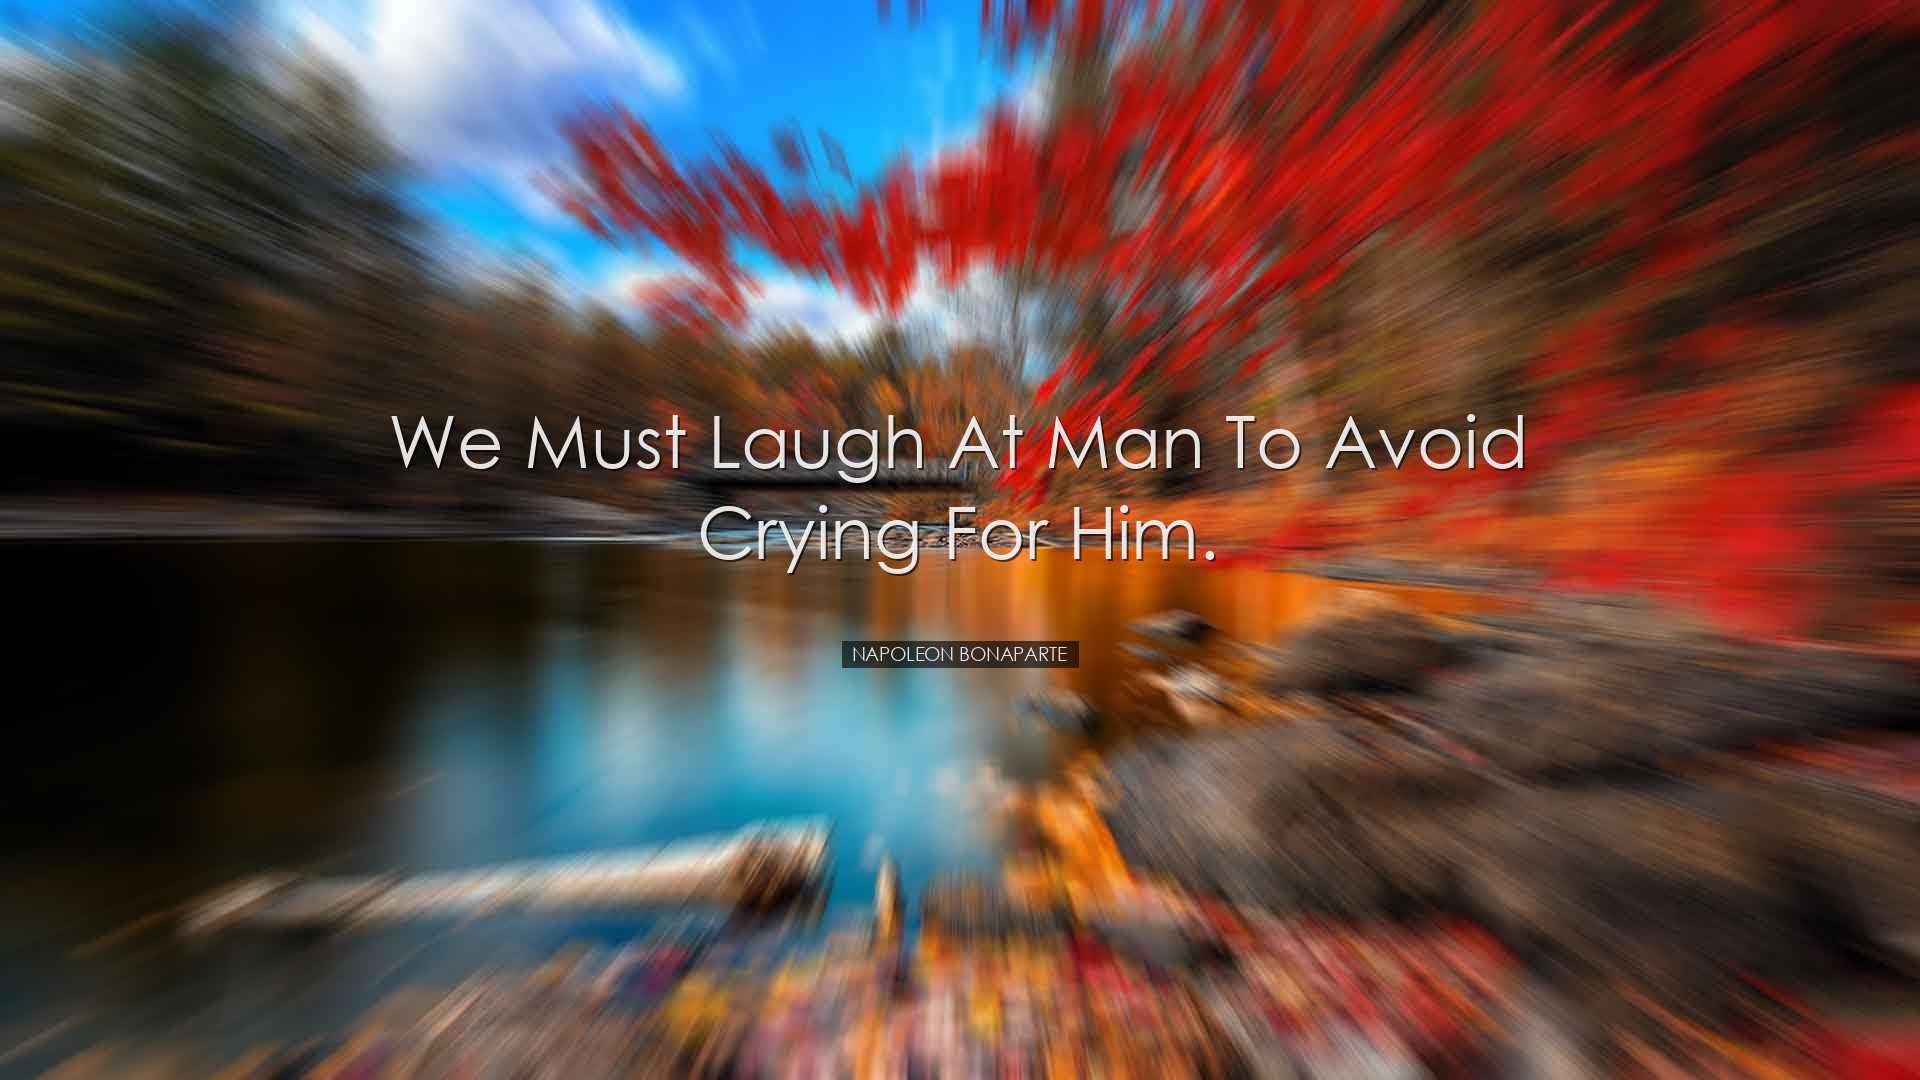 We must laugh at man to avoid crying for him. - Napoleon Bonaparte